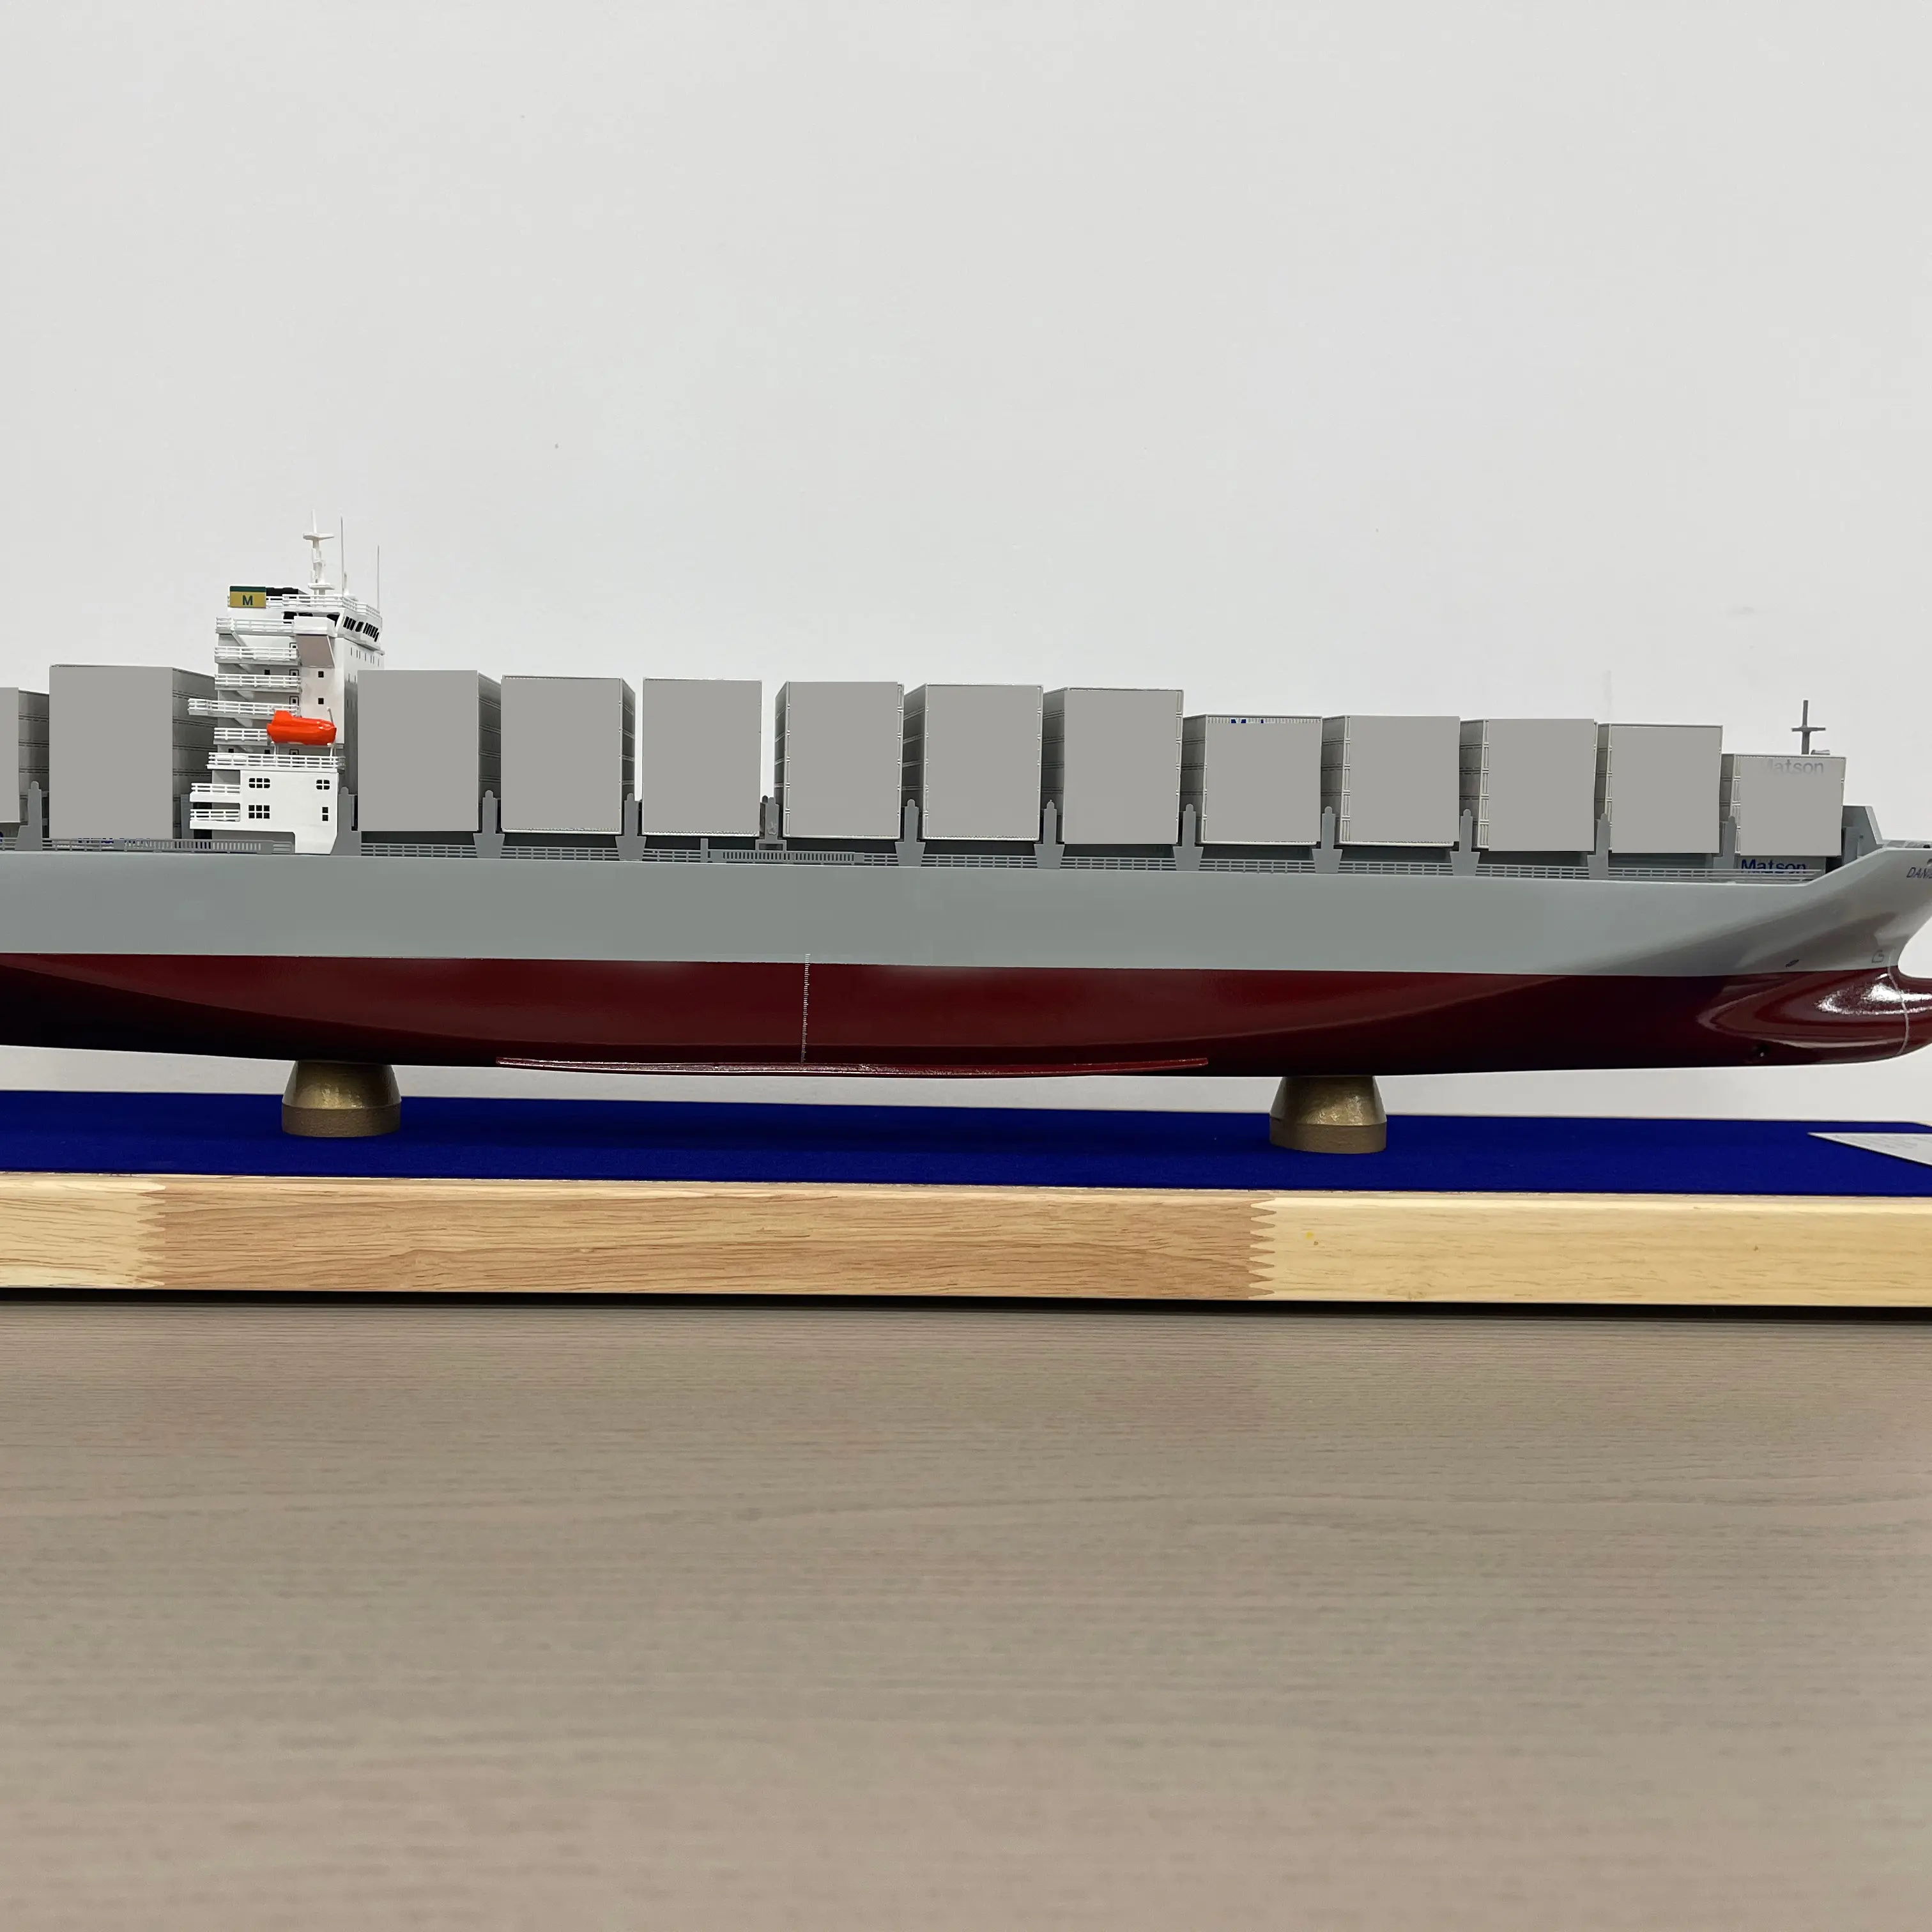 Hot selling gift senior container ship model custom business gift/children's toys birthday gift with wood base and acrylic cover